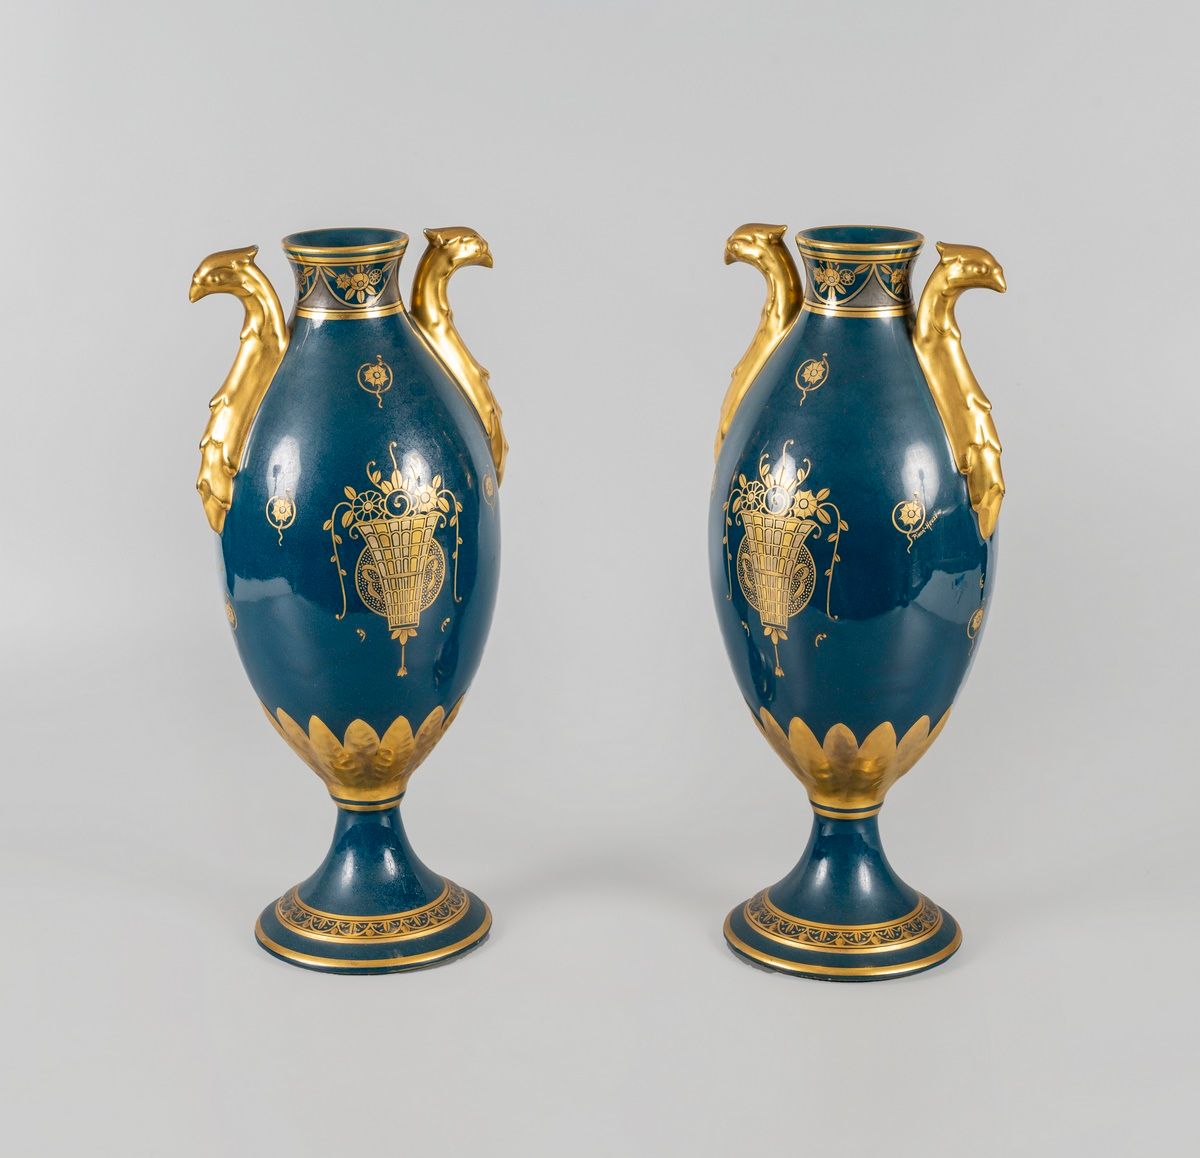 Null Manufacture JAGET AND PINON in Tours

Pair of blue and gold enamelled porce&hellip;